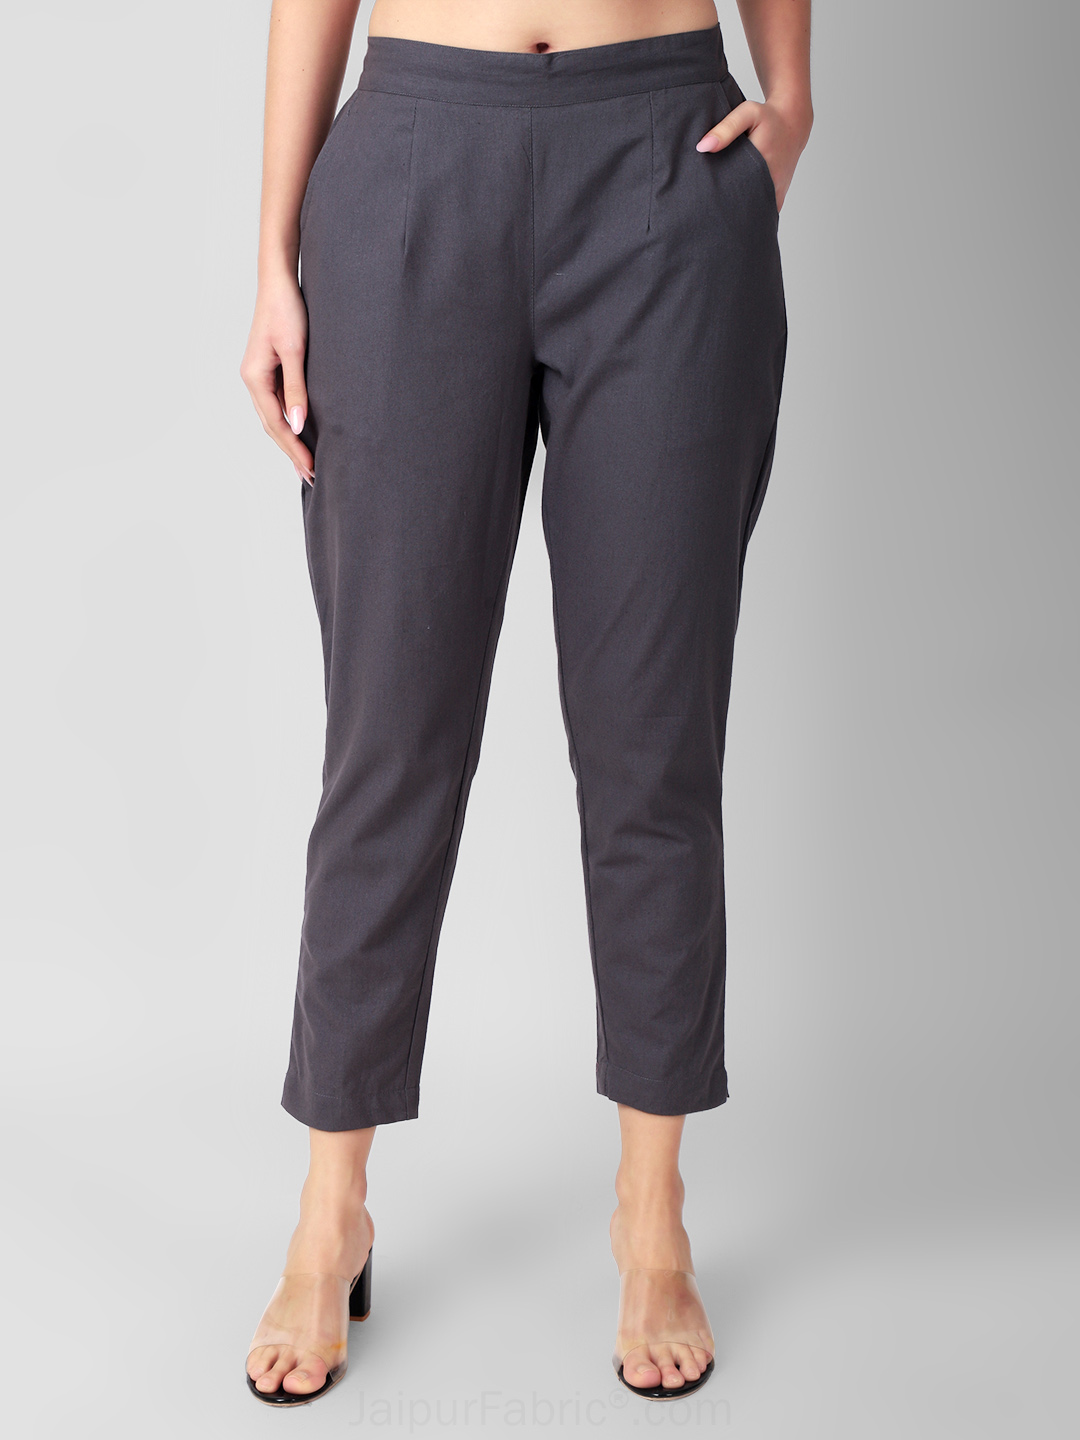 Slate Grey Women Cotton Pants casual and semi formal daily trousers